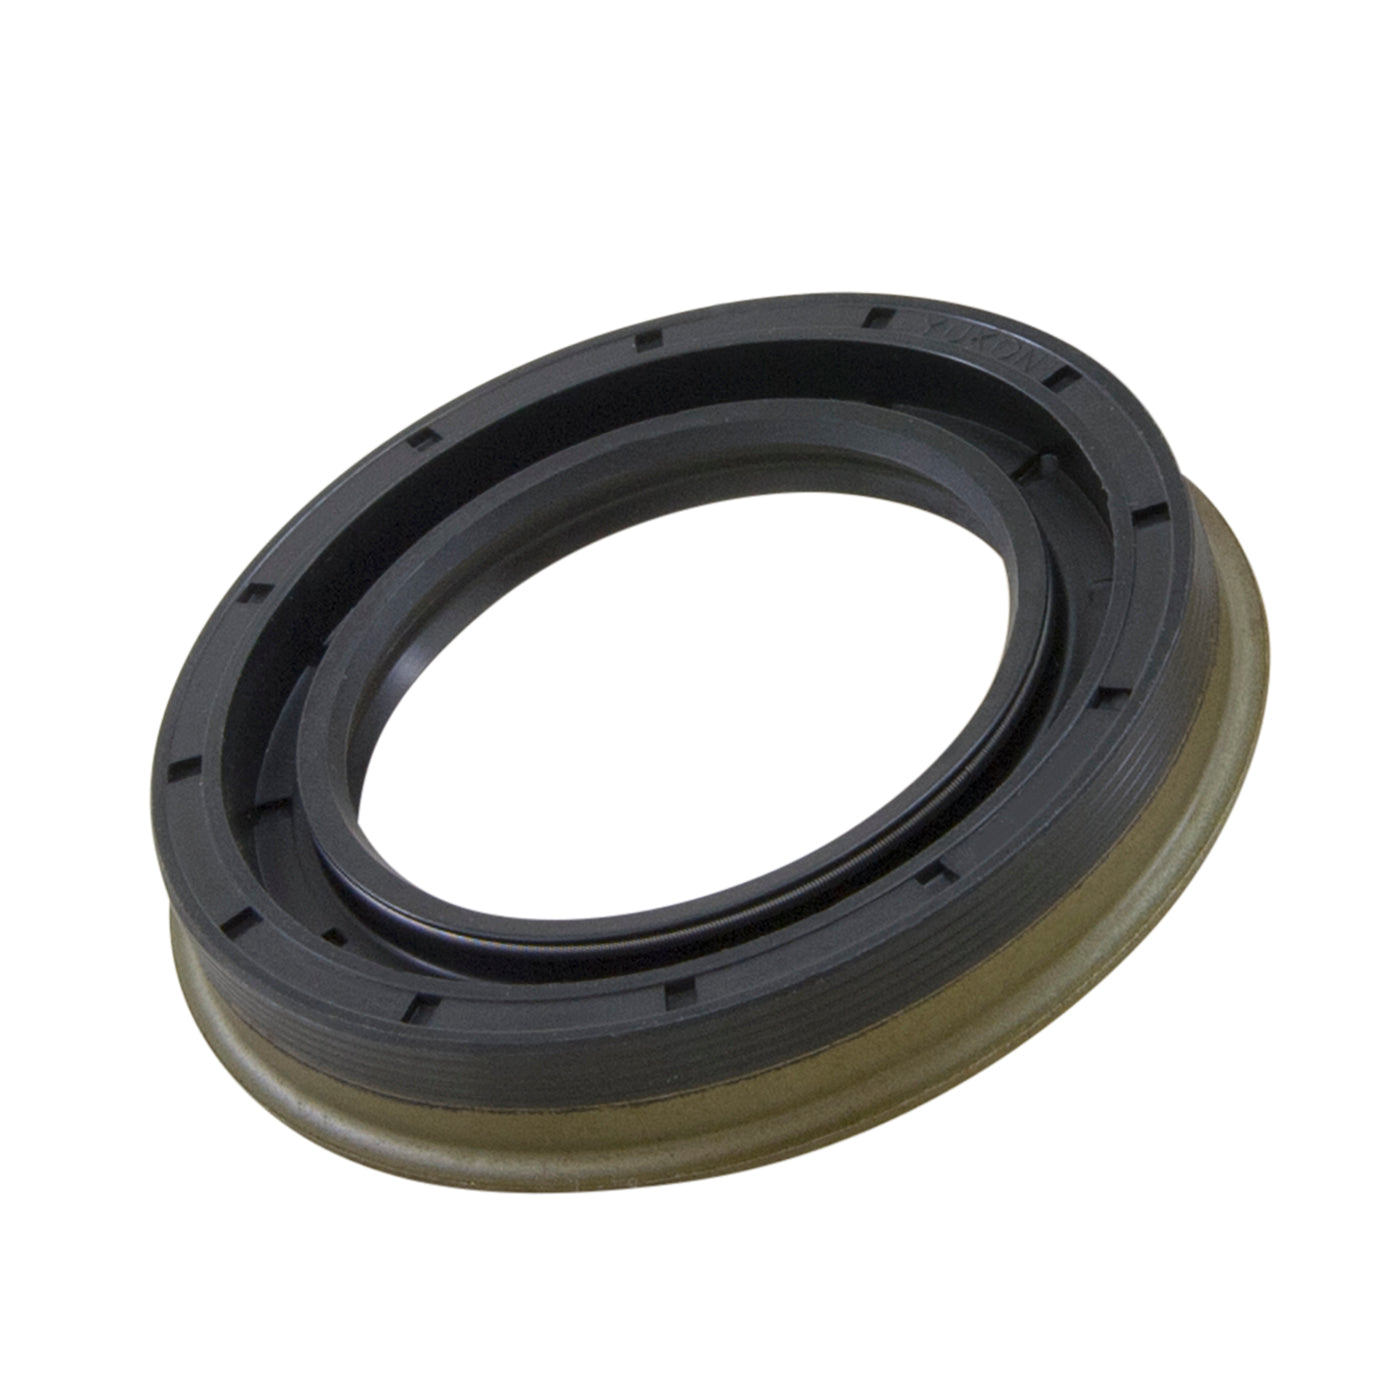 Yukon Gear Chevrolet GMC Hummer (4WD) Differential Pinion Seal - Front YMS710281